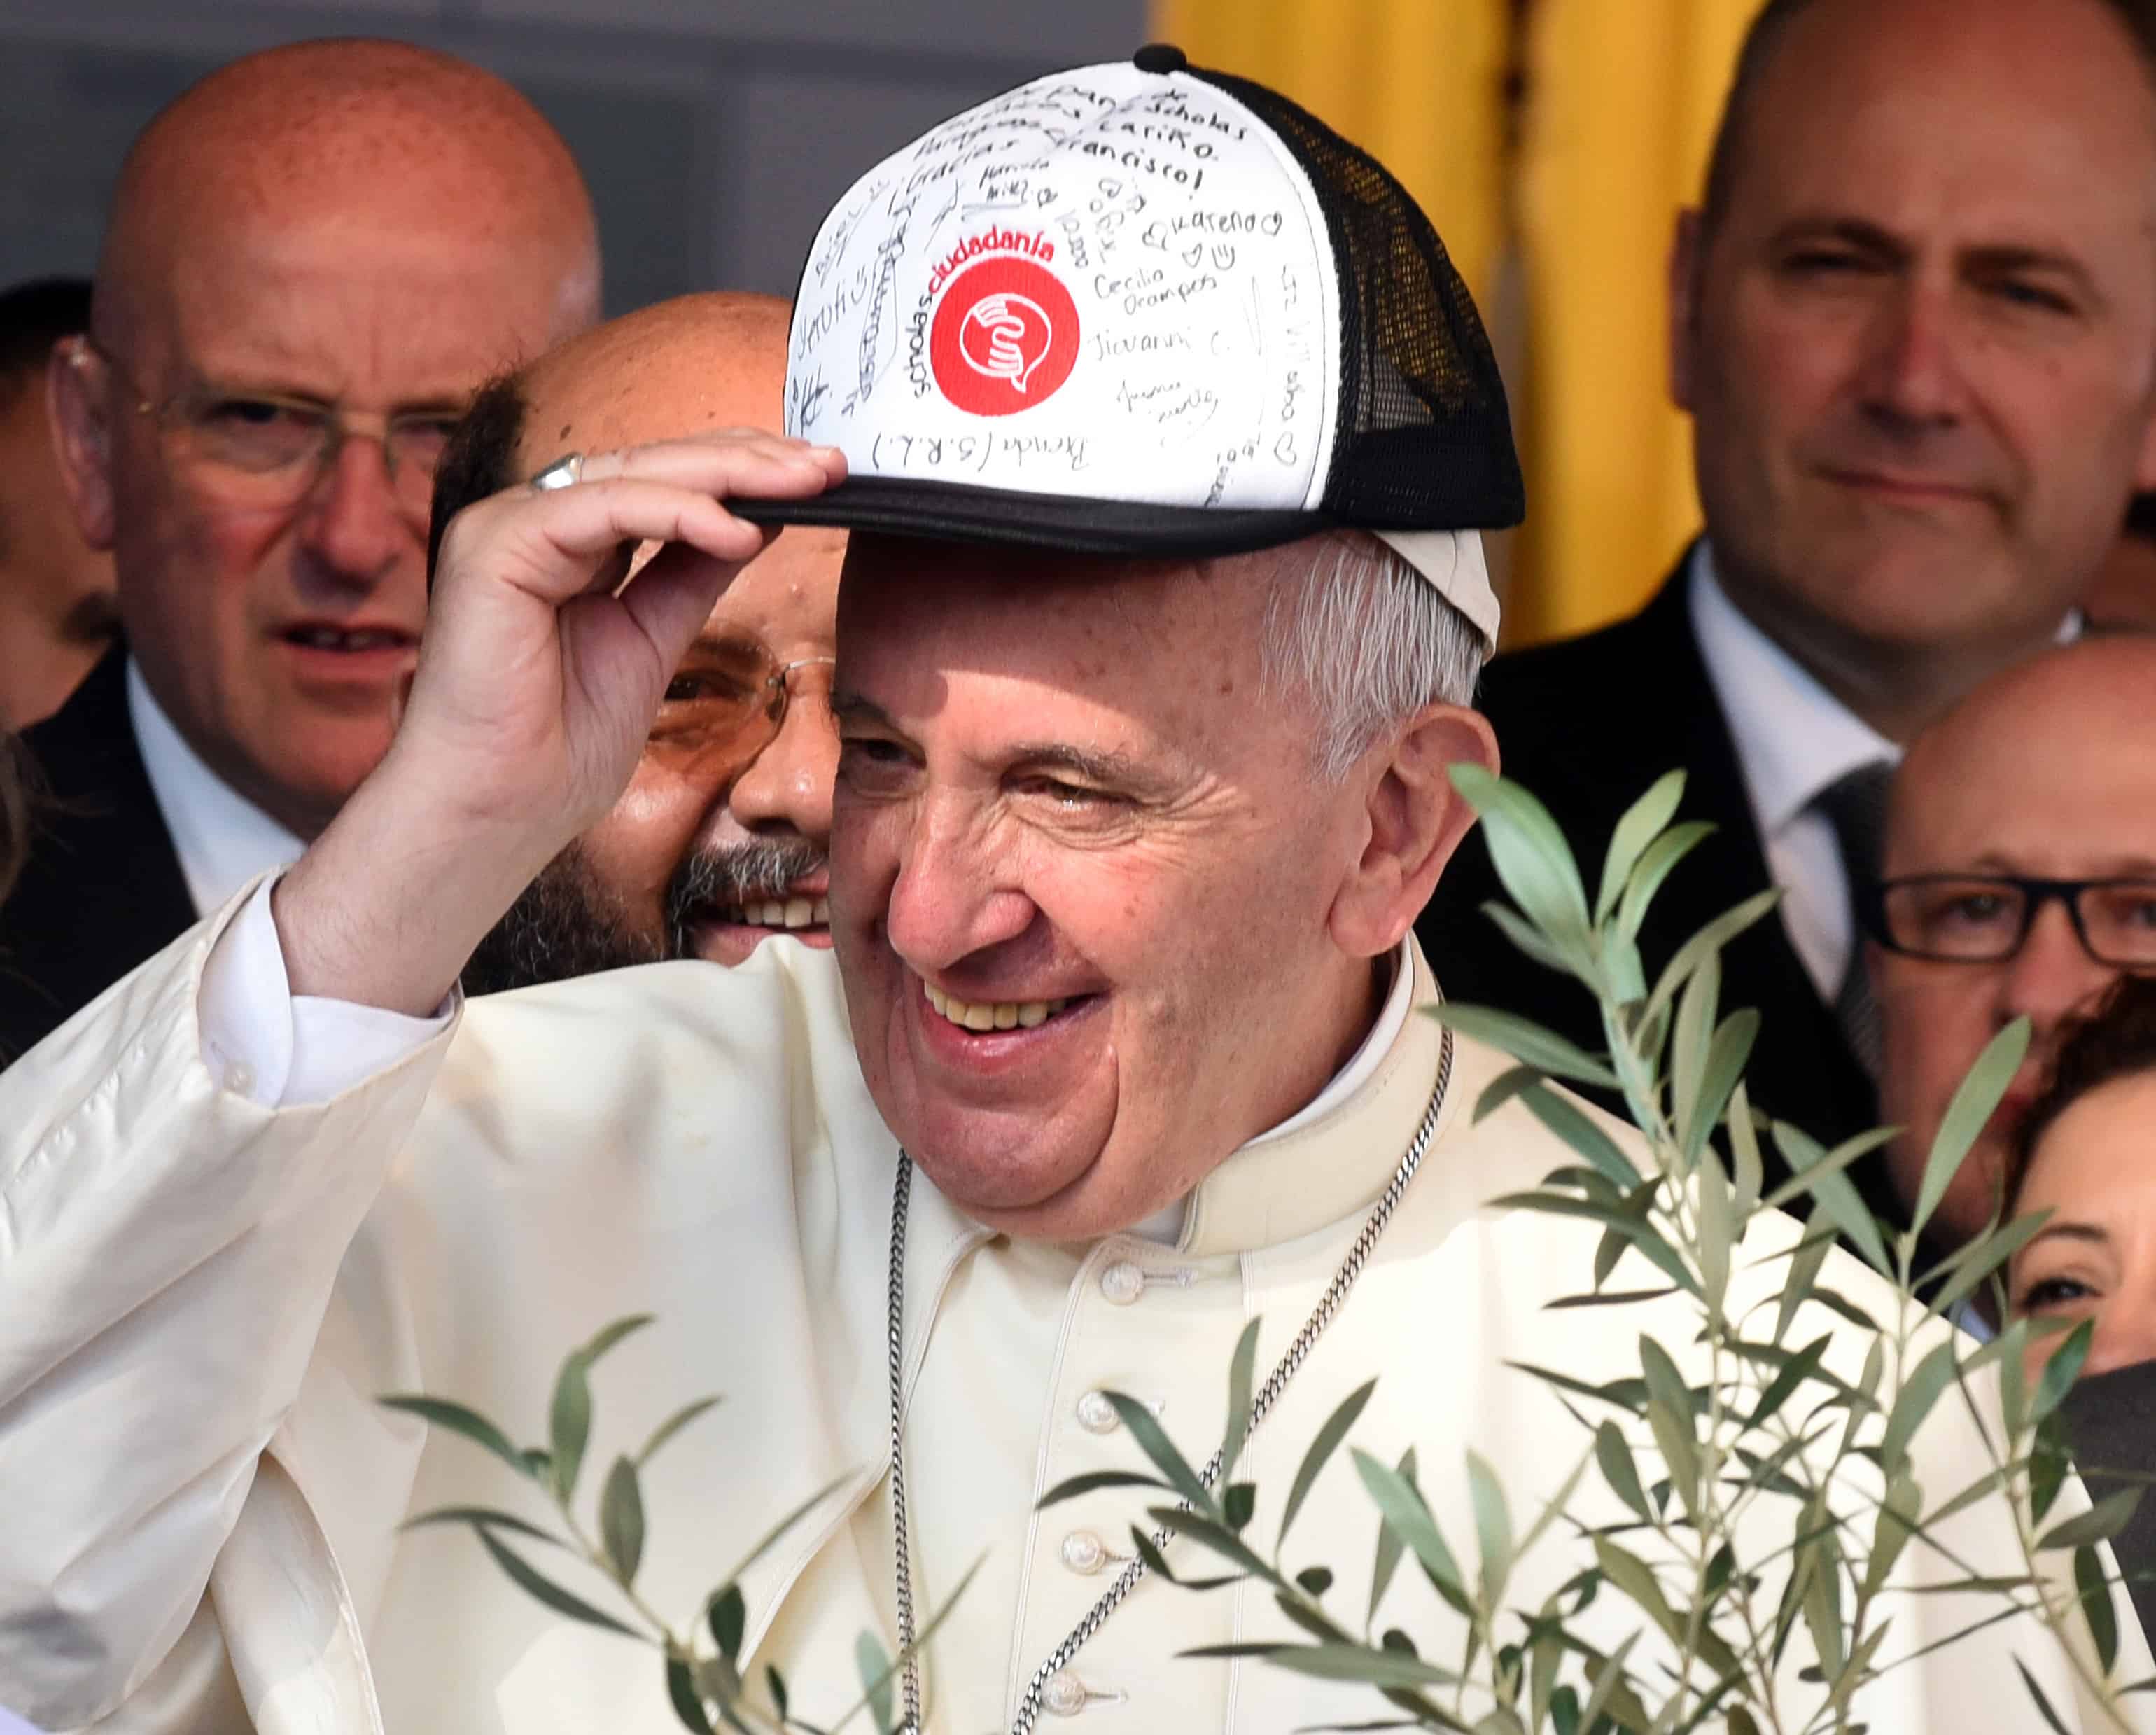 Pope Francis wears a cap signed by residents of Bañado Norte during his visit in Asunción.